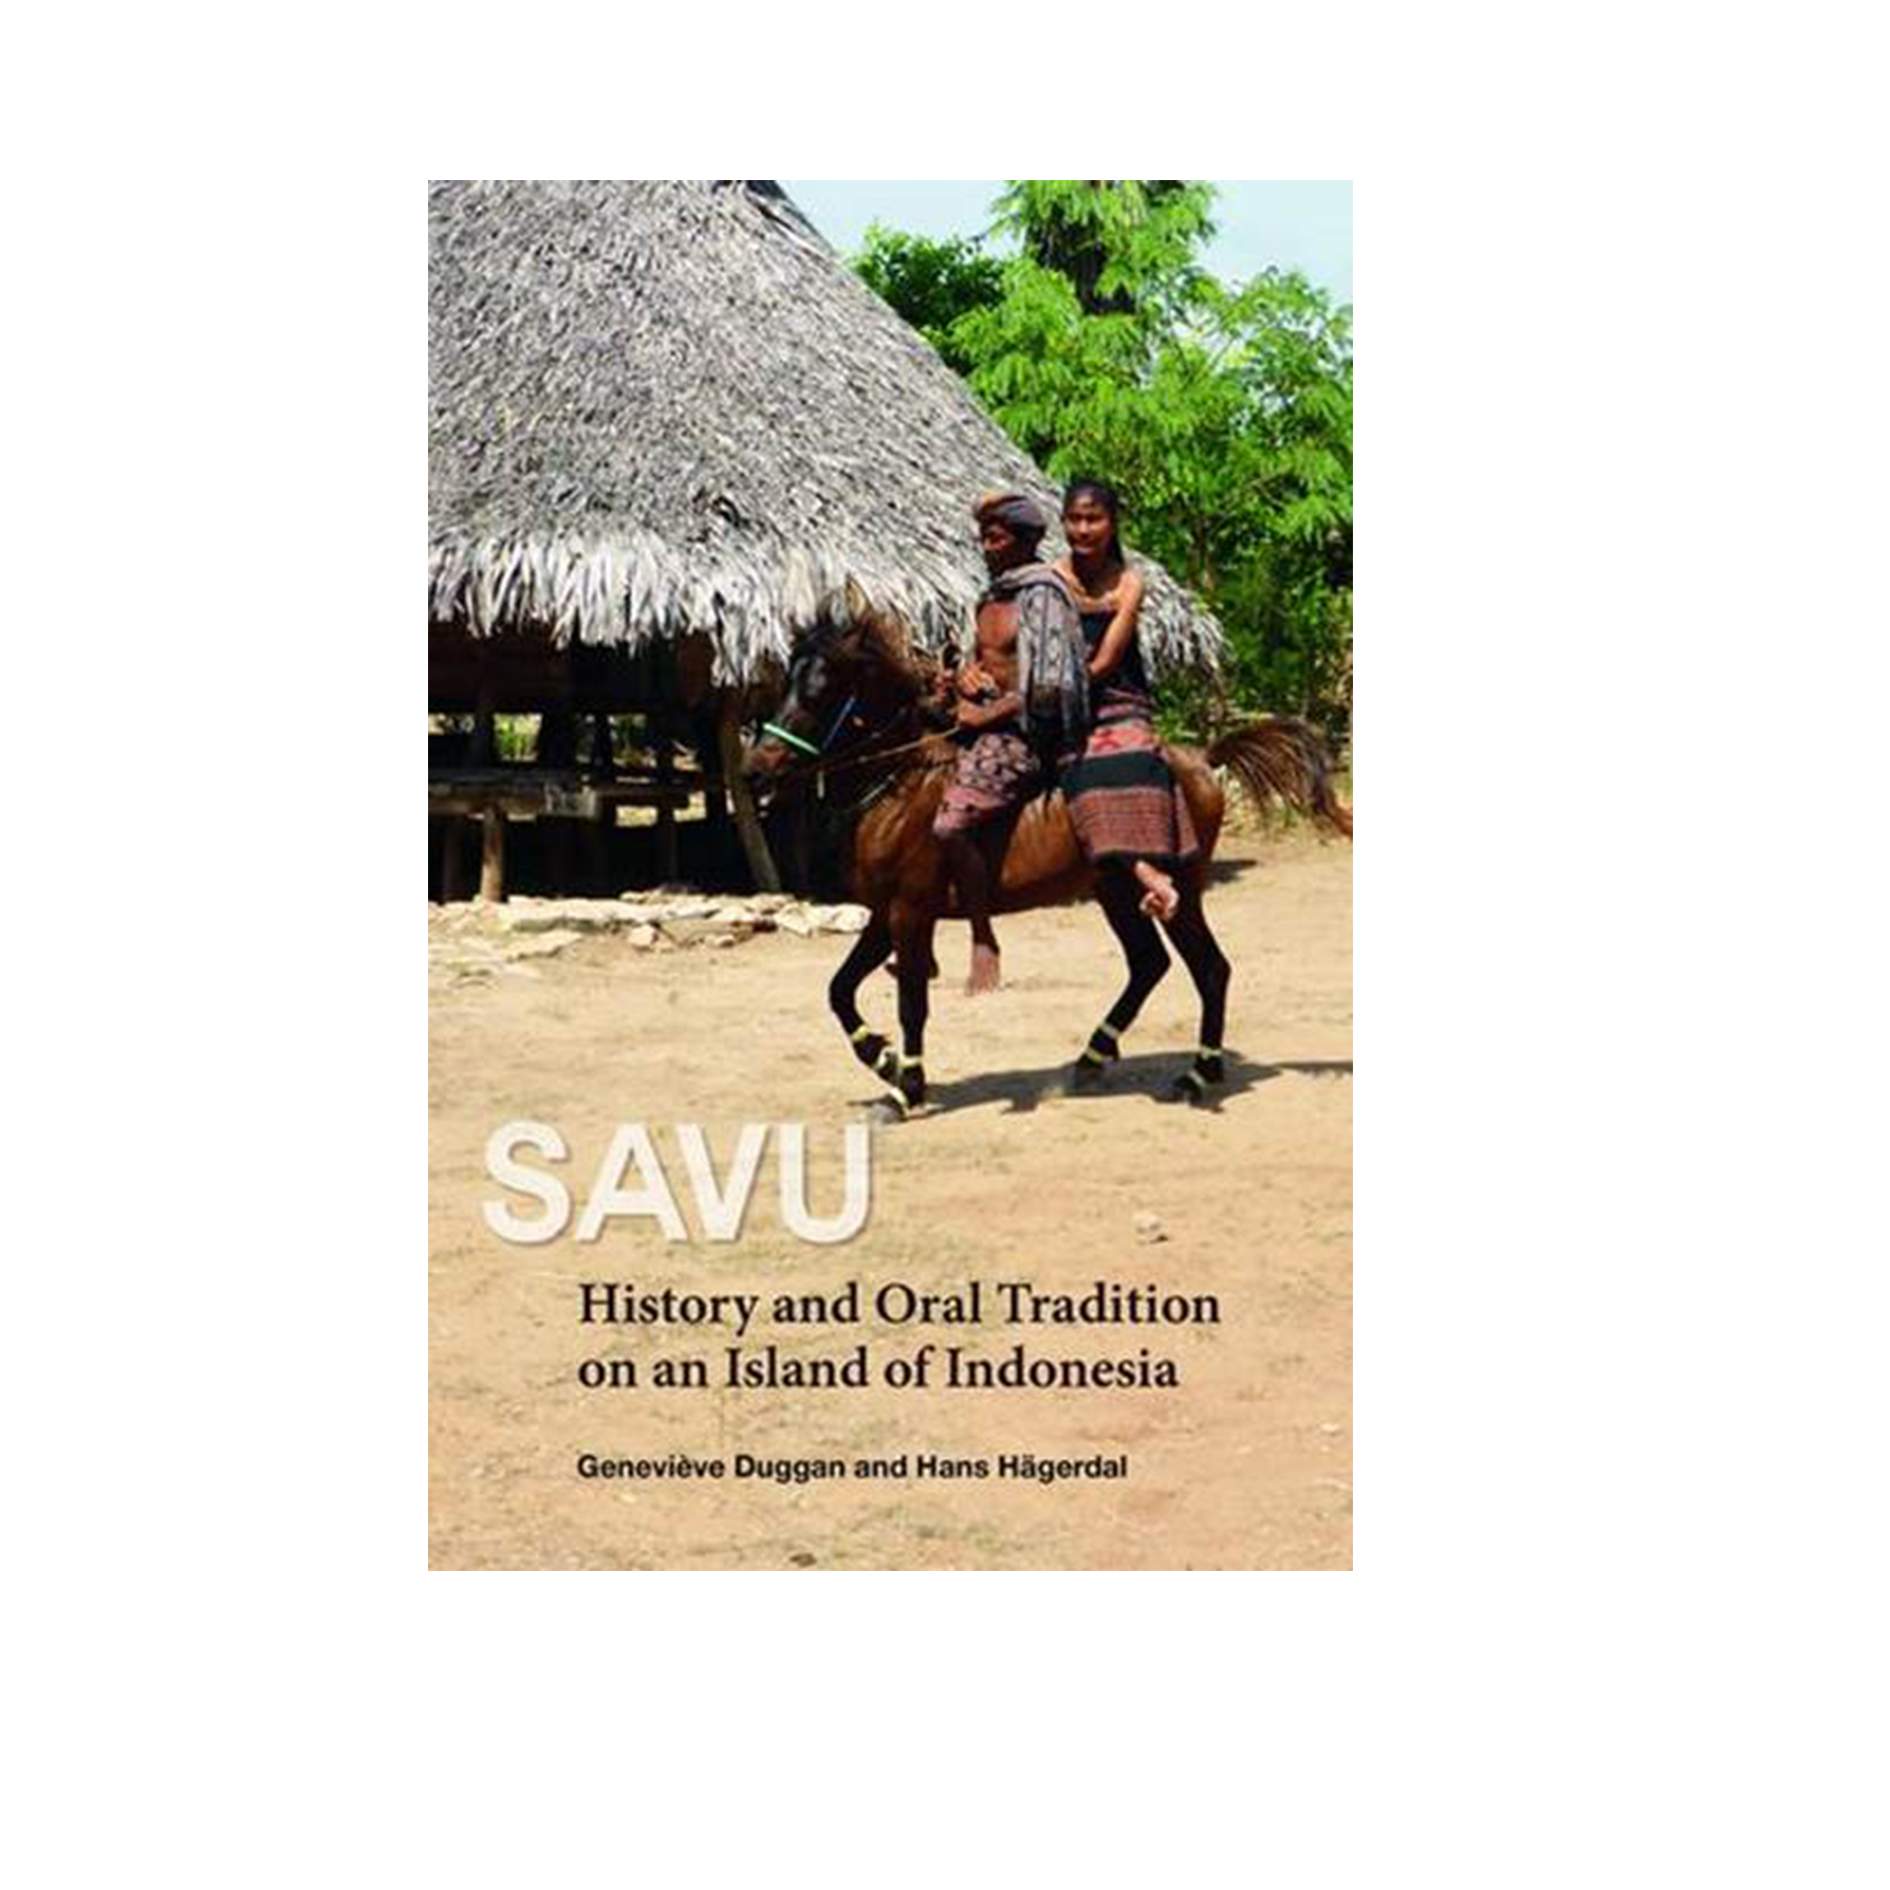 Savu: History and Oral Tradition on an Island of Indonesia